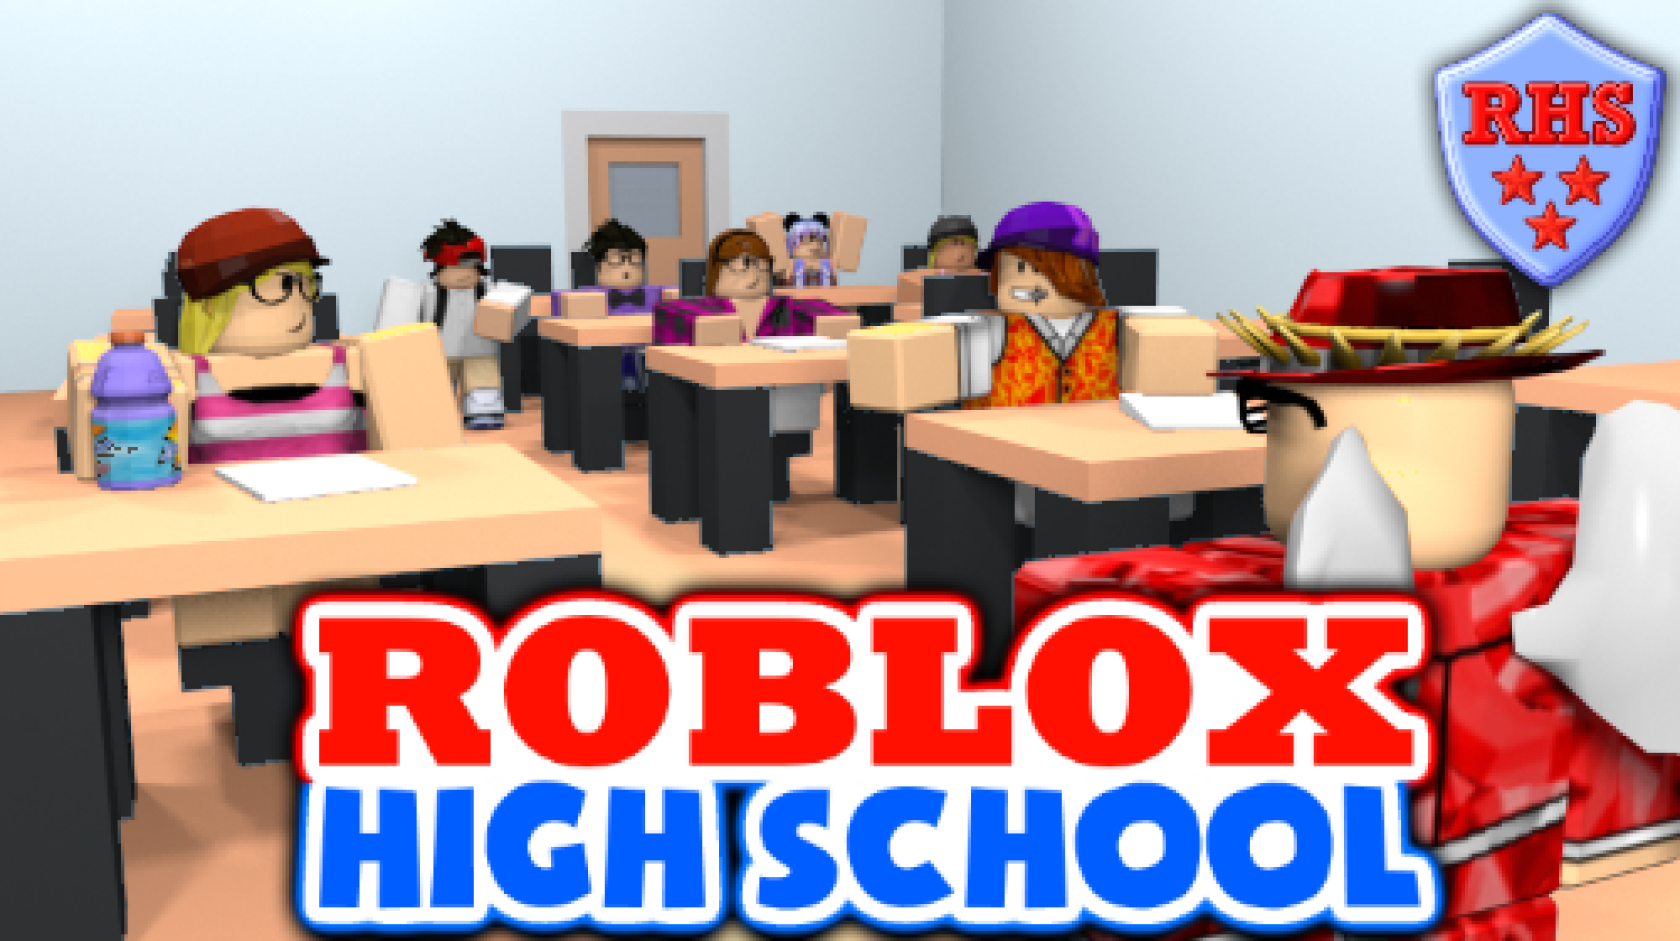 That's new, why roblox doesn't want my money anymore? : r/roblox